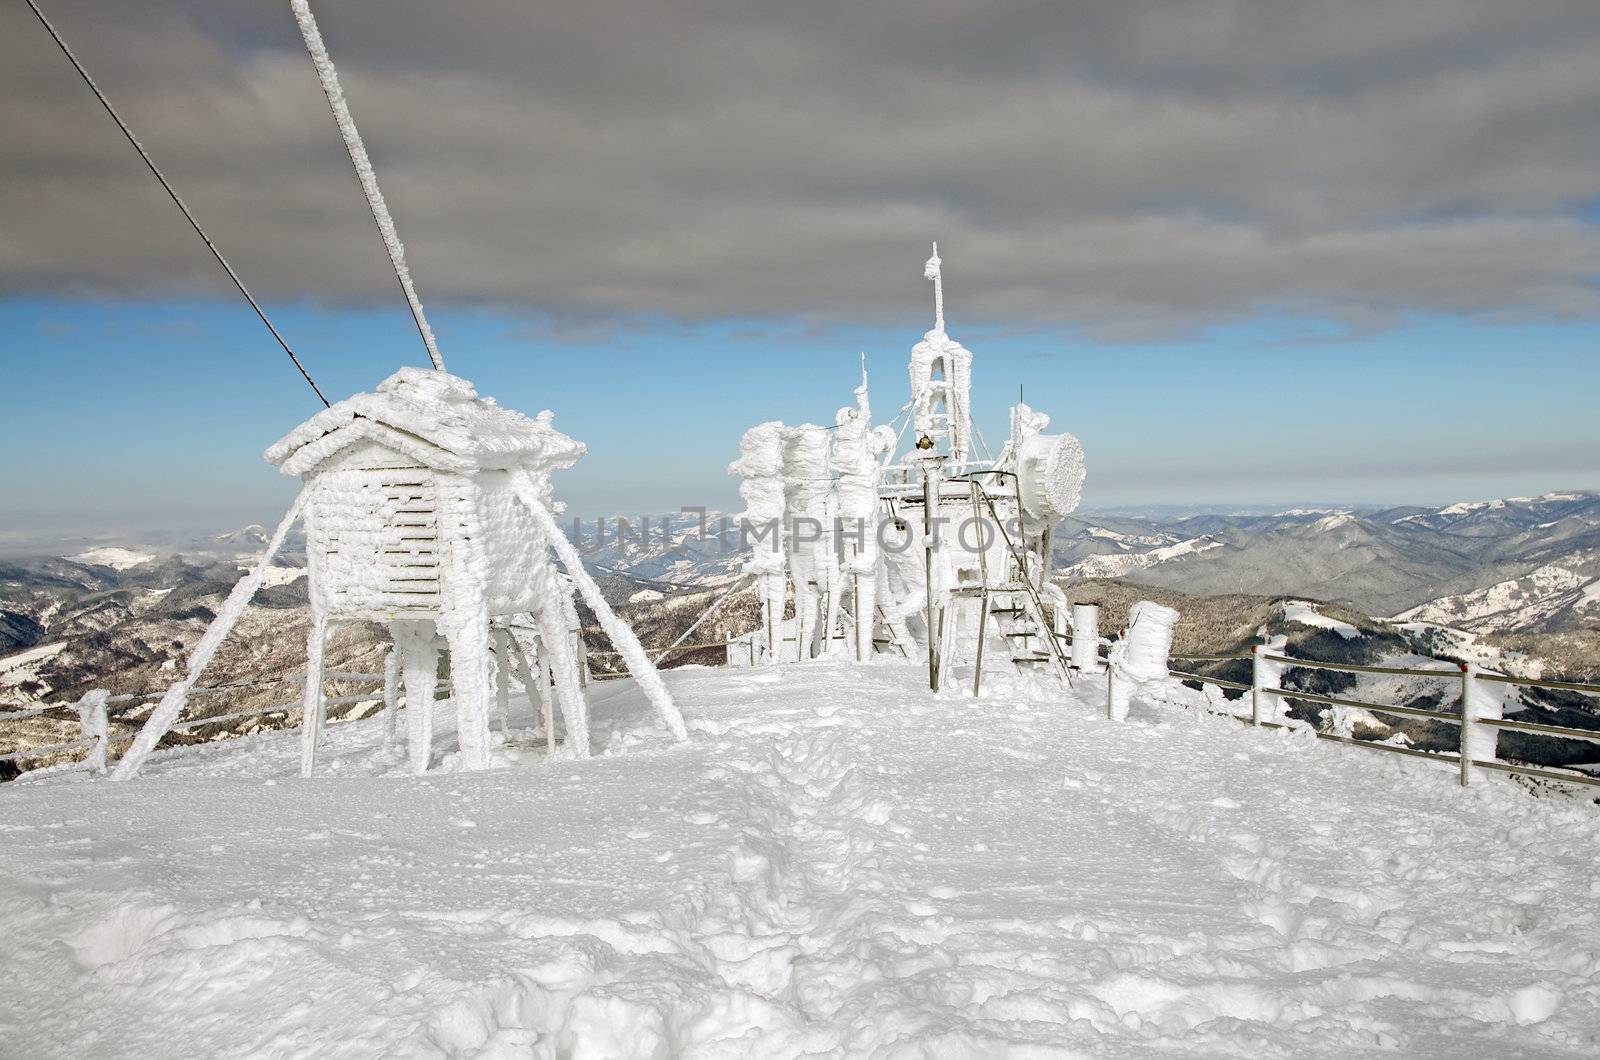 Frozen weather station on mountain top